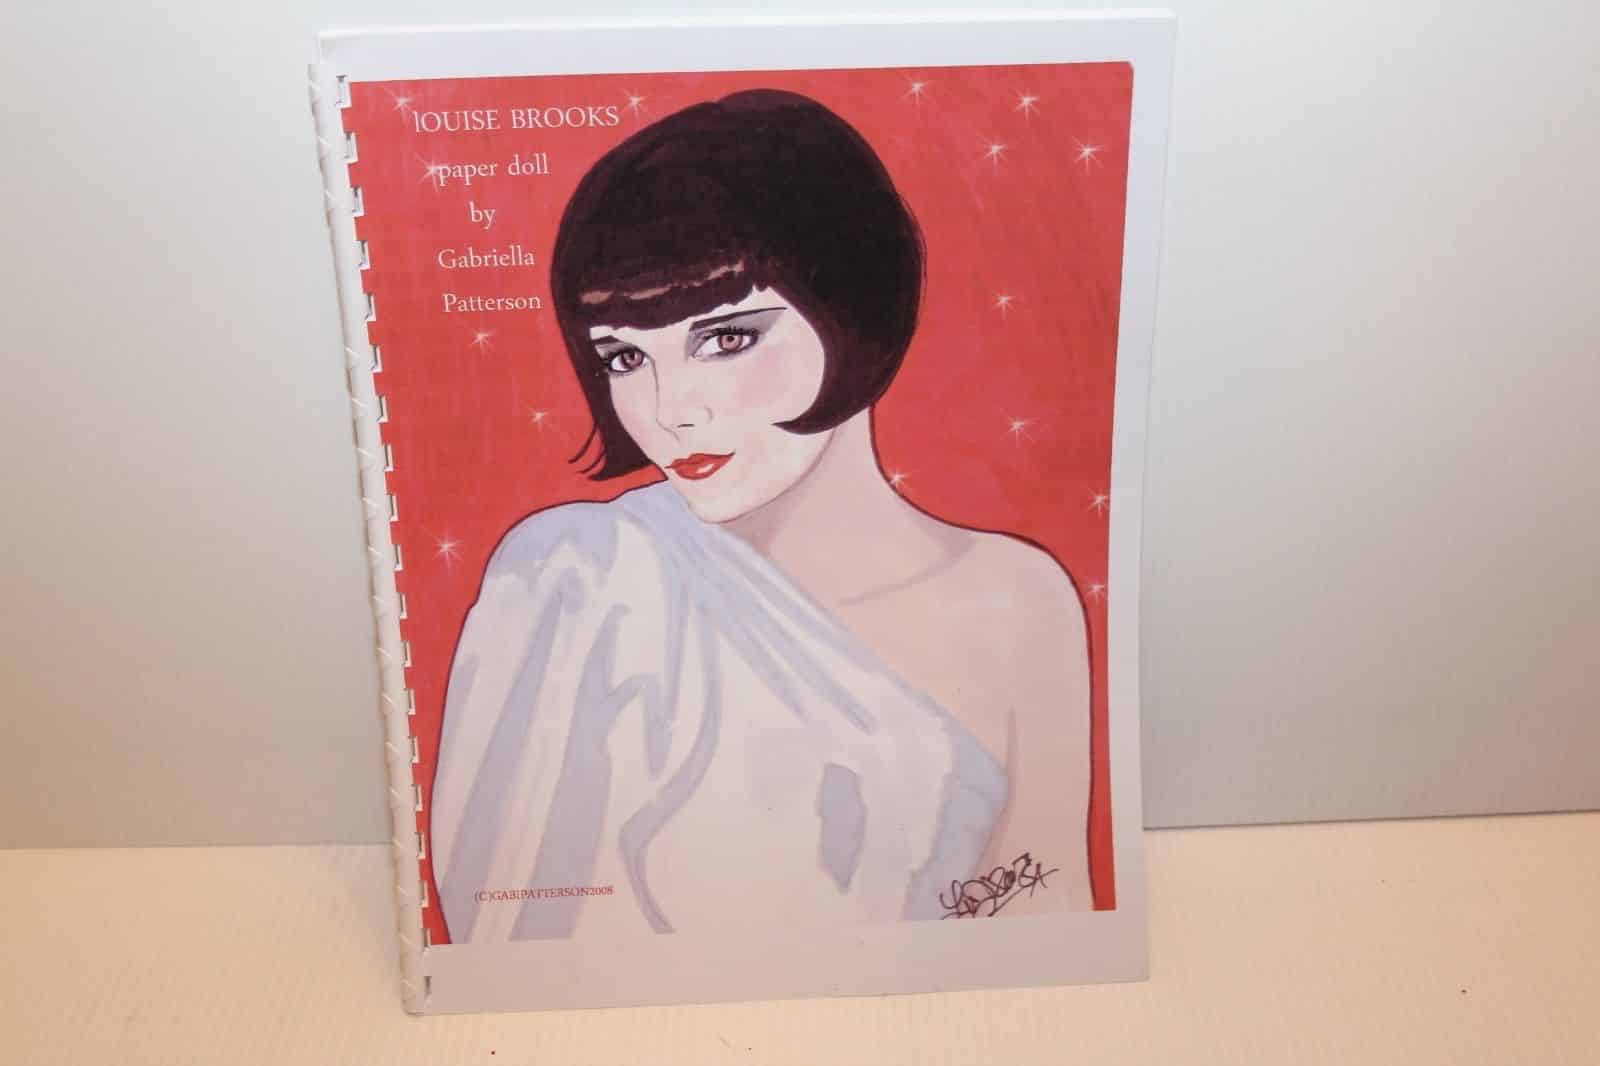 2008 Louise Brooks Paper Doll by Gabriella Patterson